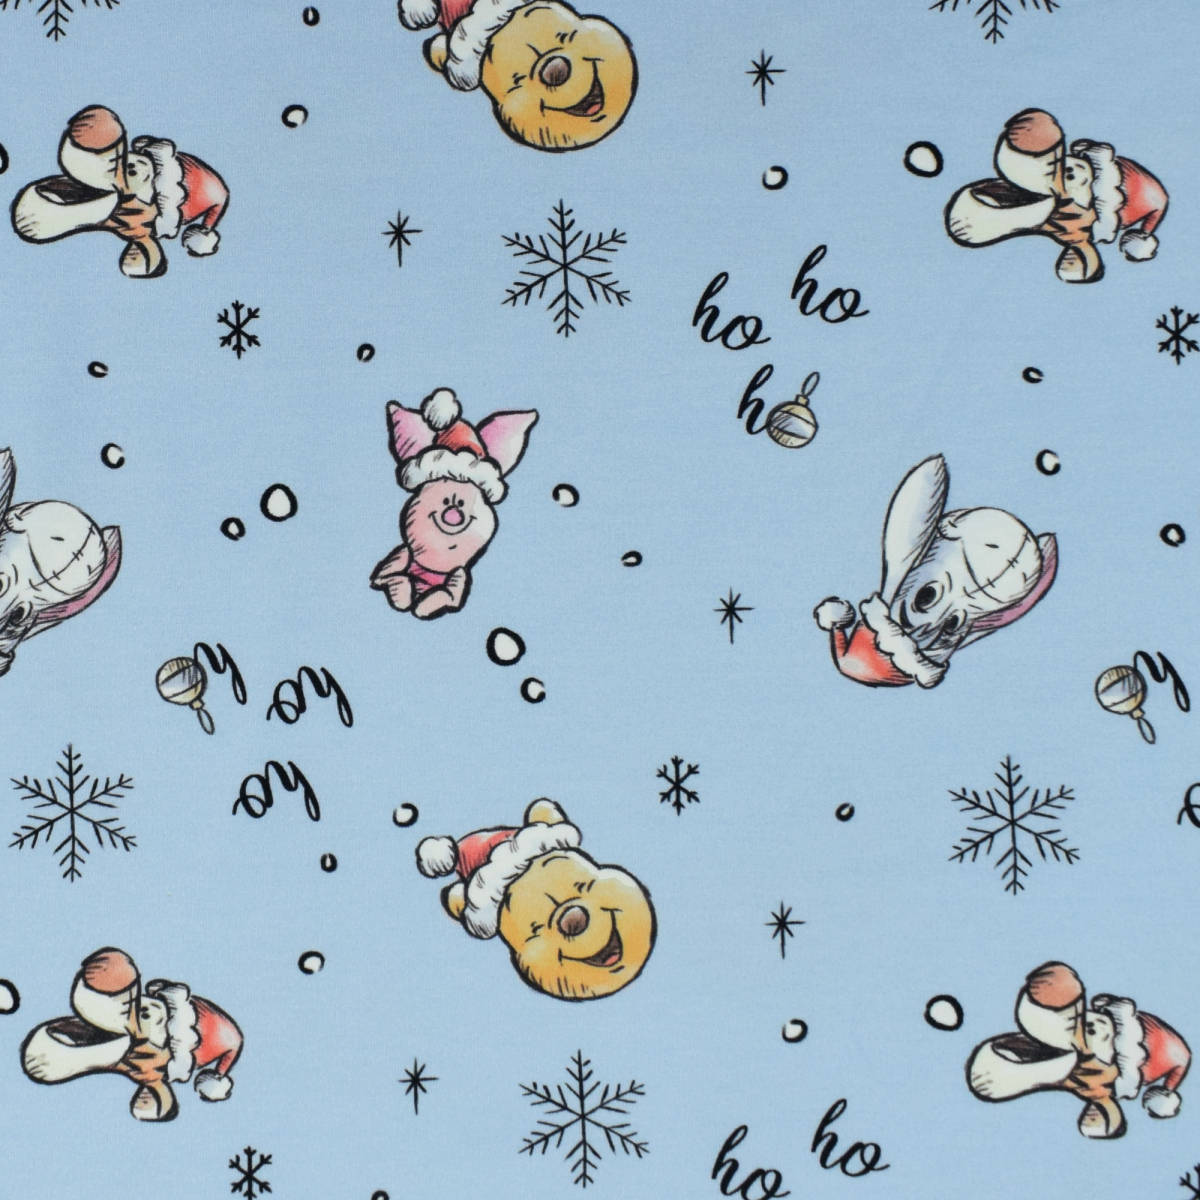 Celebrate the most wonderful time of the year with Winnie the Pooh and his friends! Wallpaper